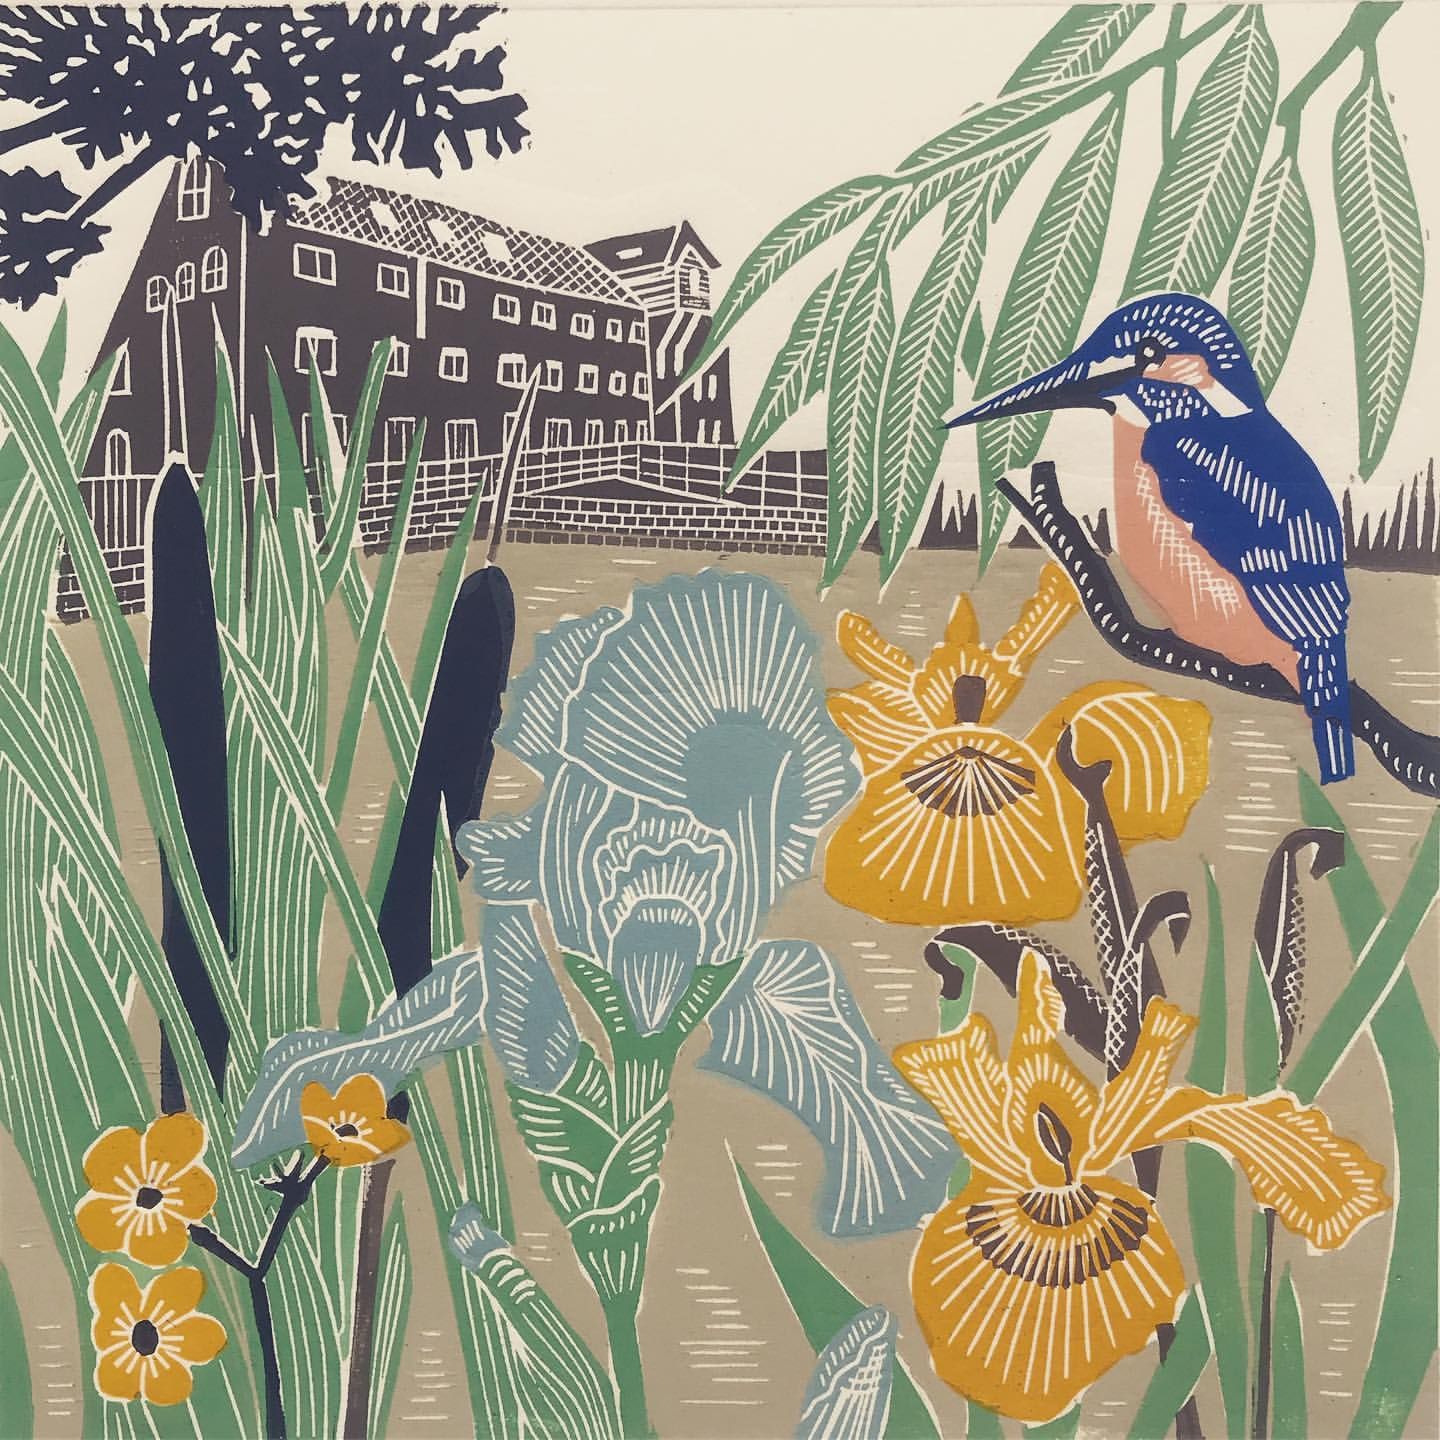 Kingfisher at the Mill by Kate Heiss